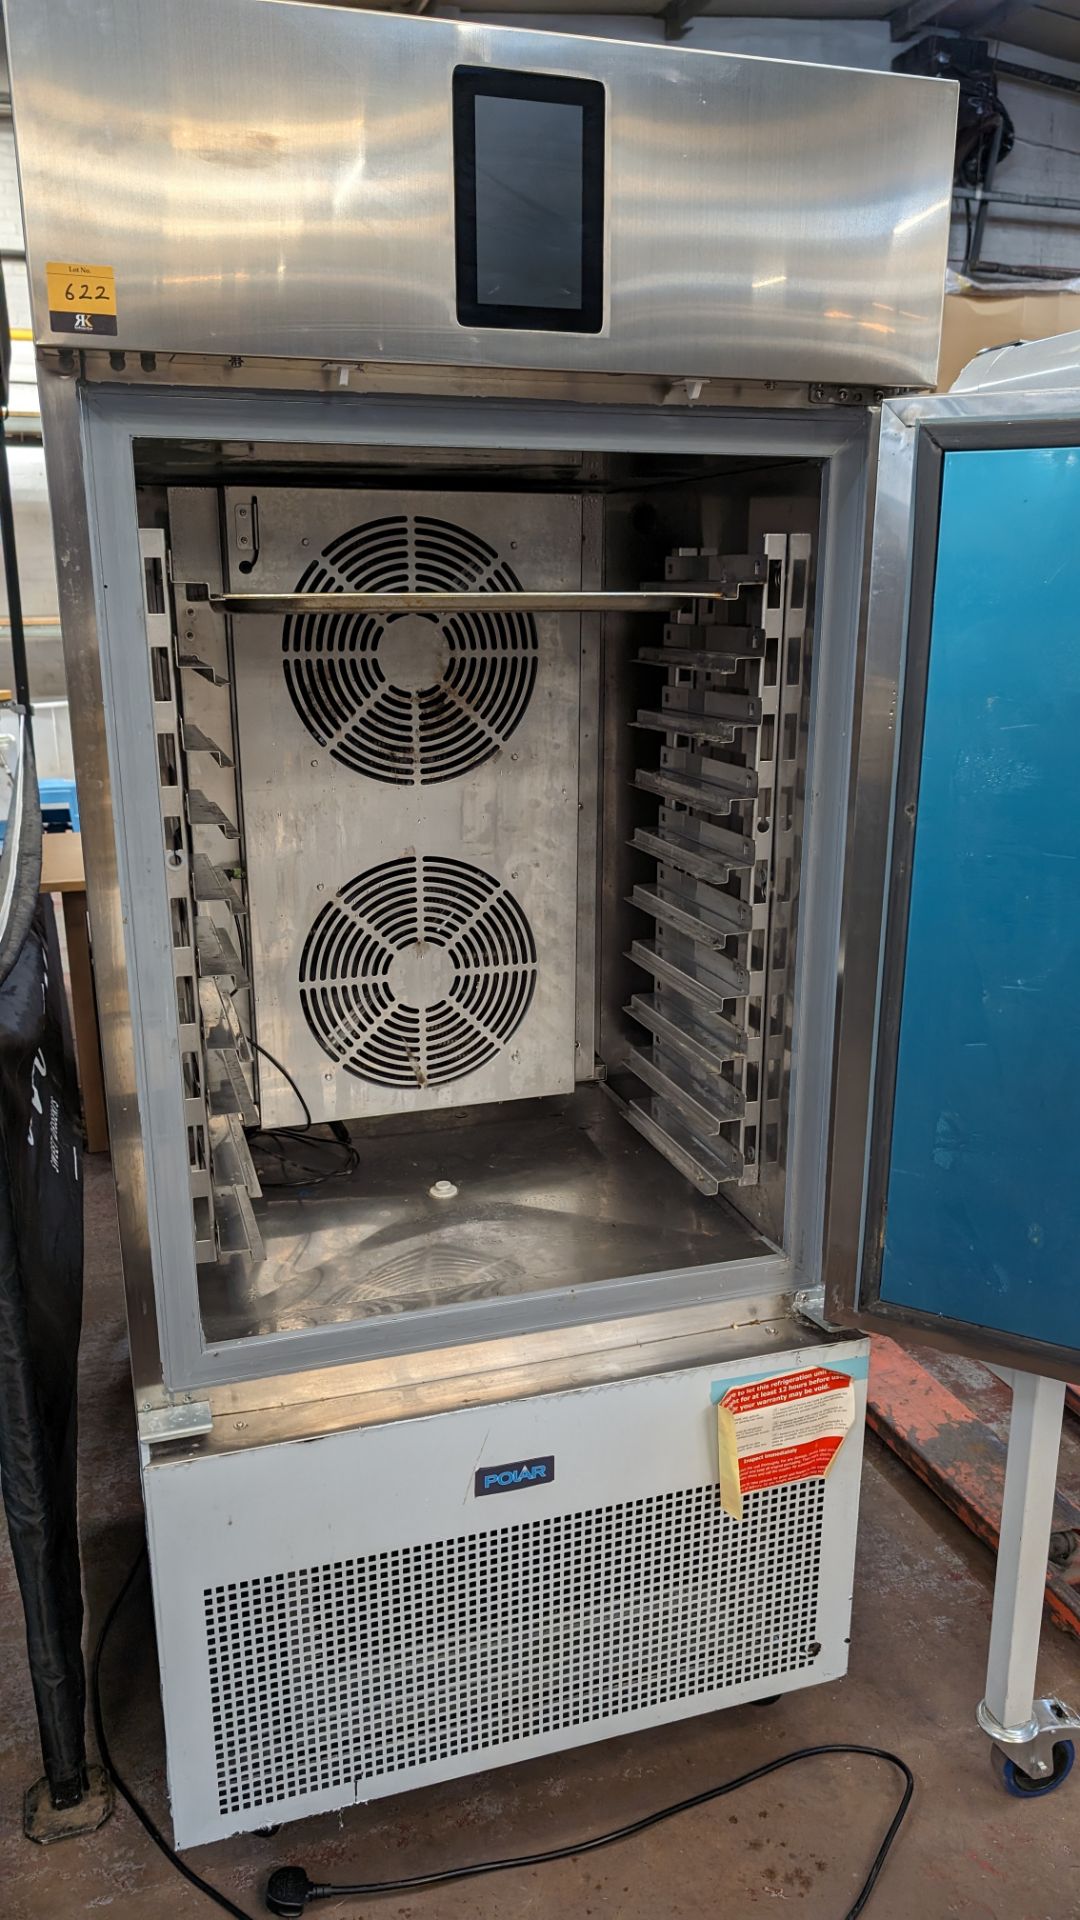 Polar Refrigeration mobile stainless steel commercial blast chiller with touchscreen controls - Bild 5 aus 9